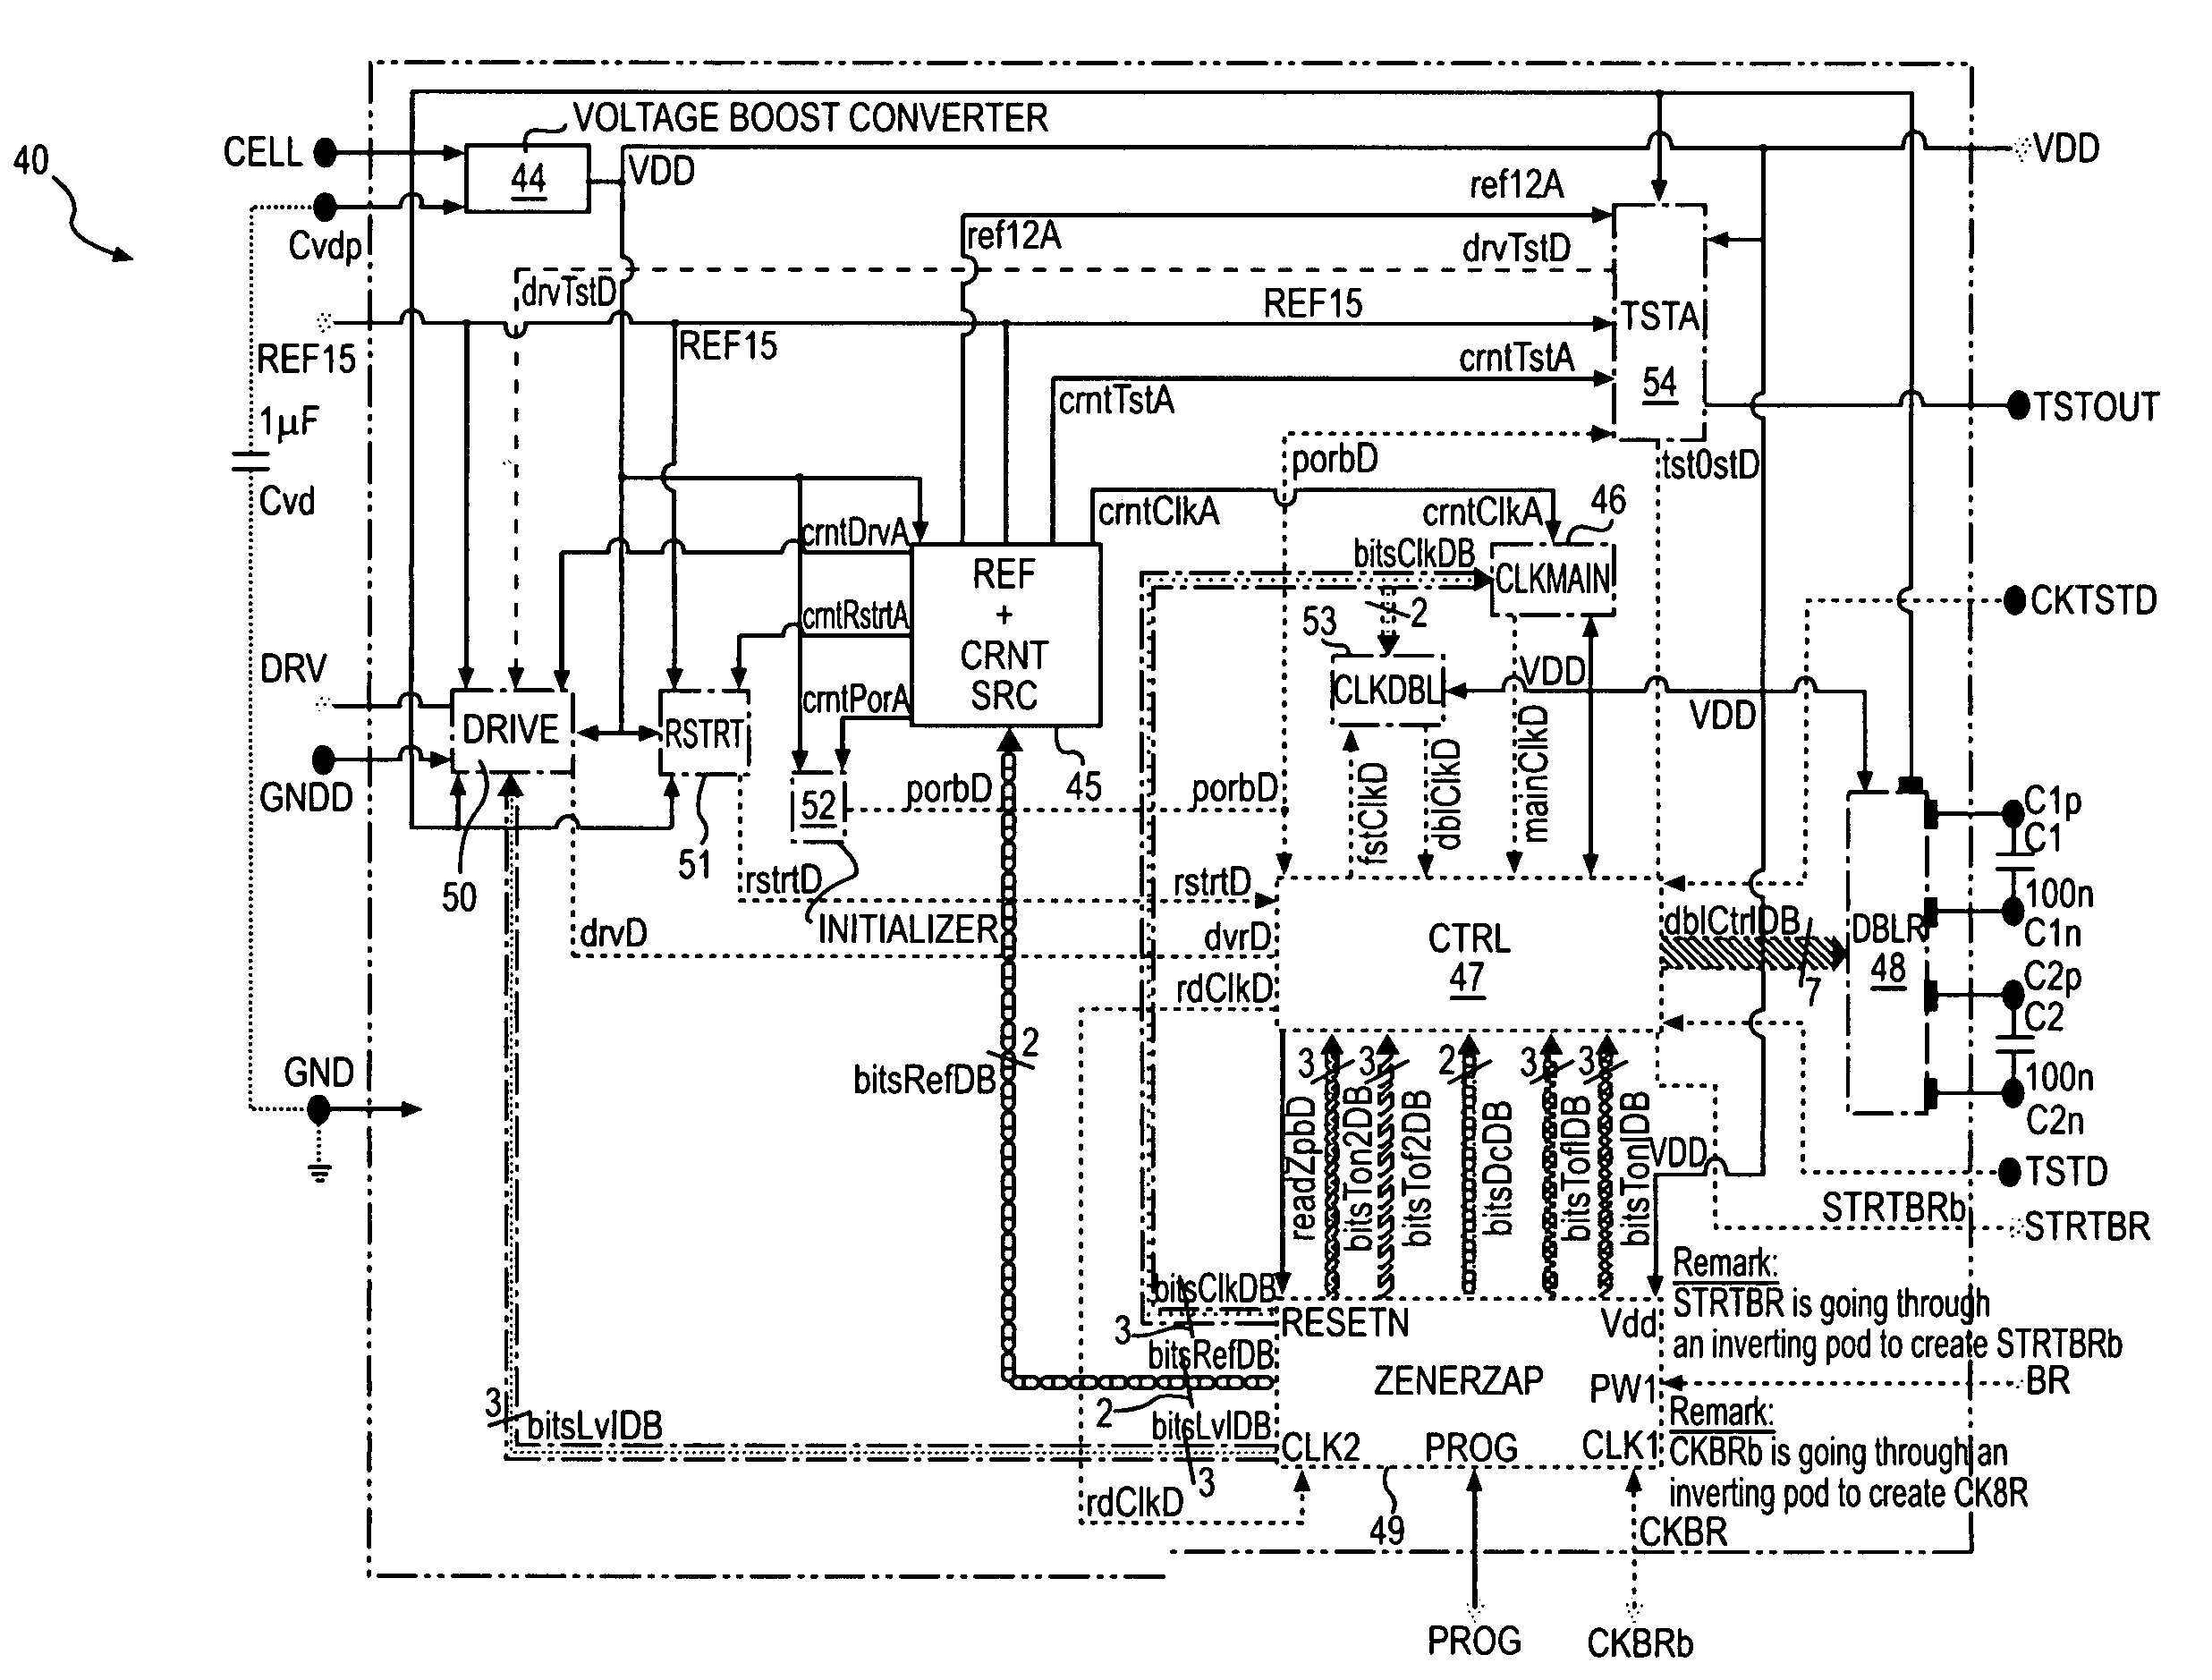 Controller for fuel cell in standby mode or no load condition